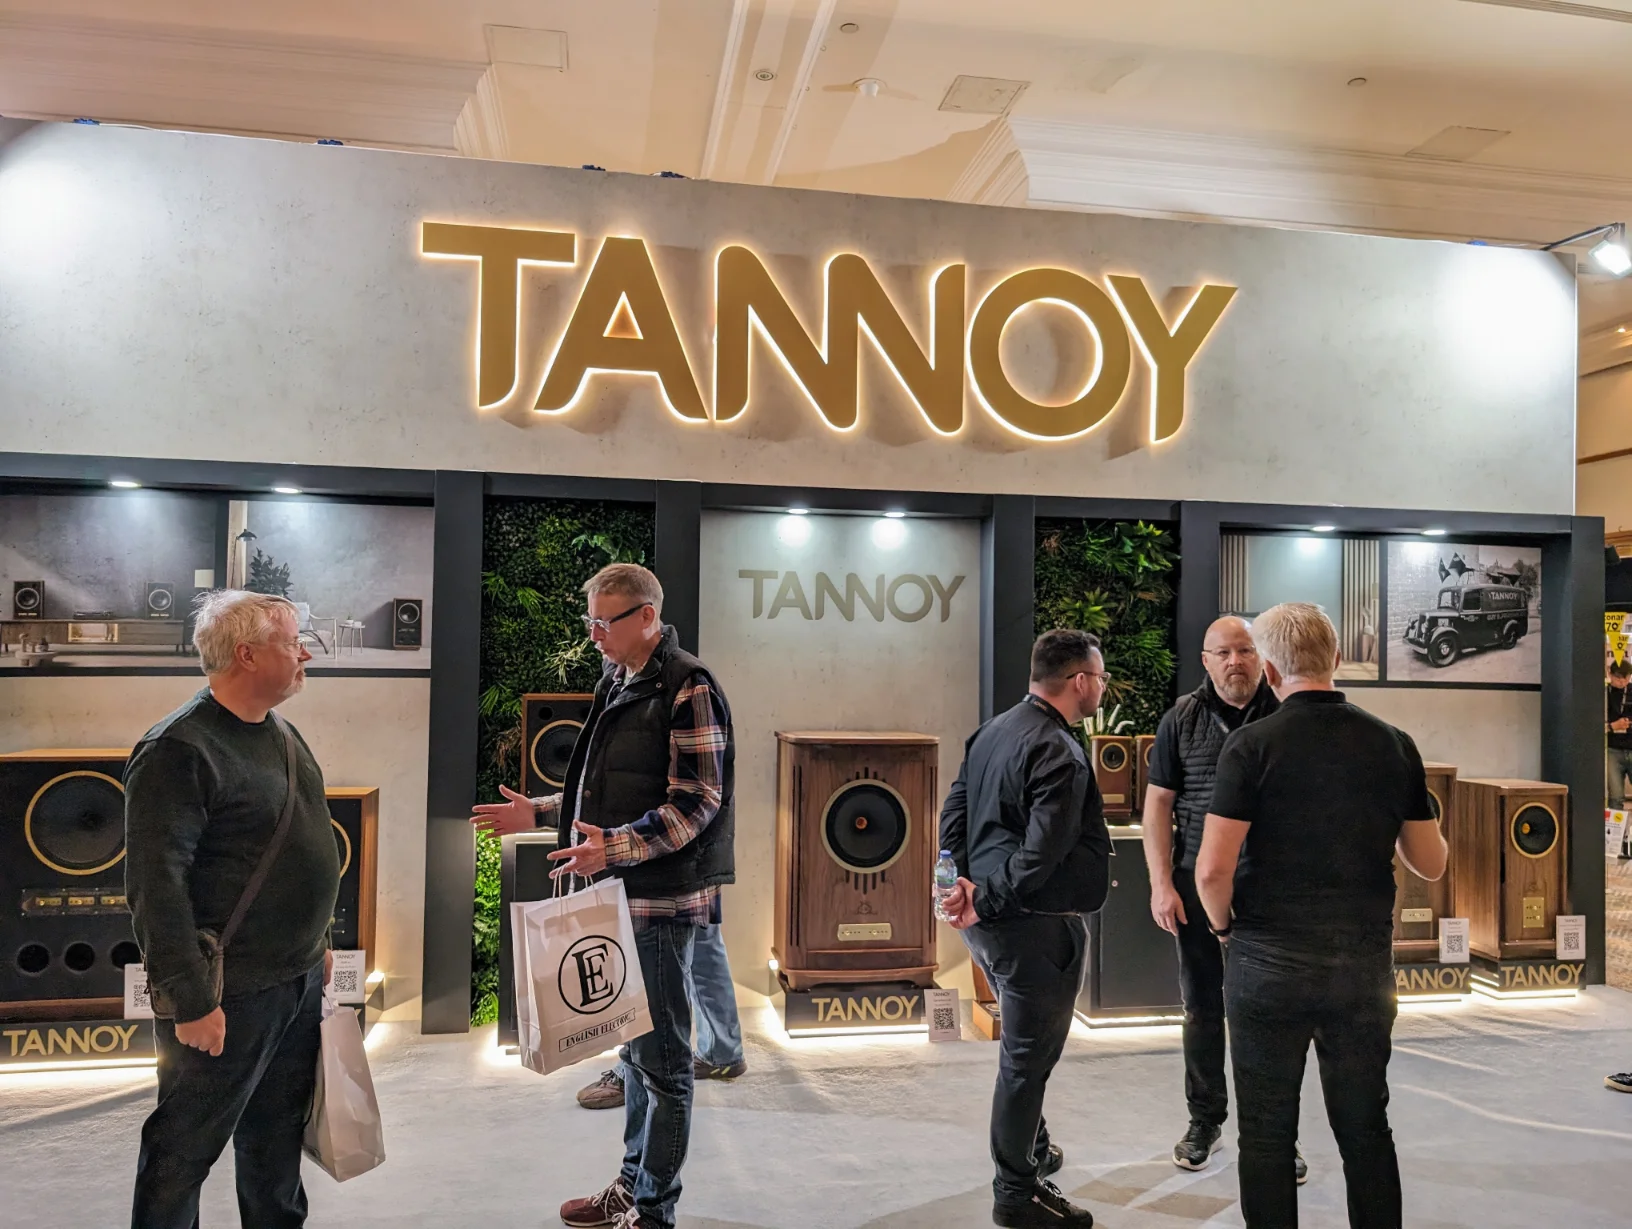 Tannoy were very well represented at the show and were seen in various locations with this stand being particularly impressive.